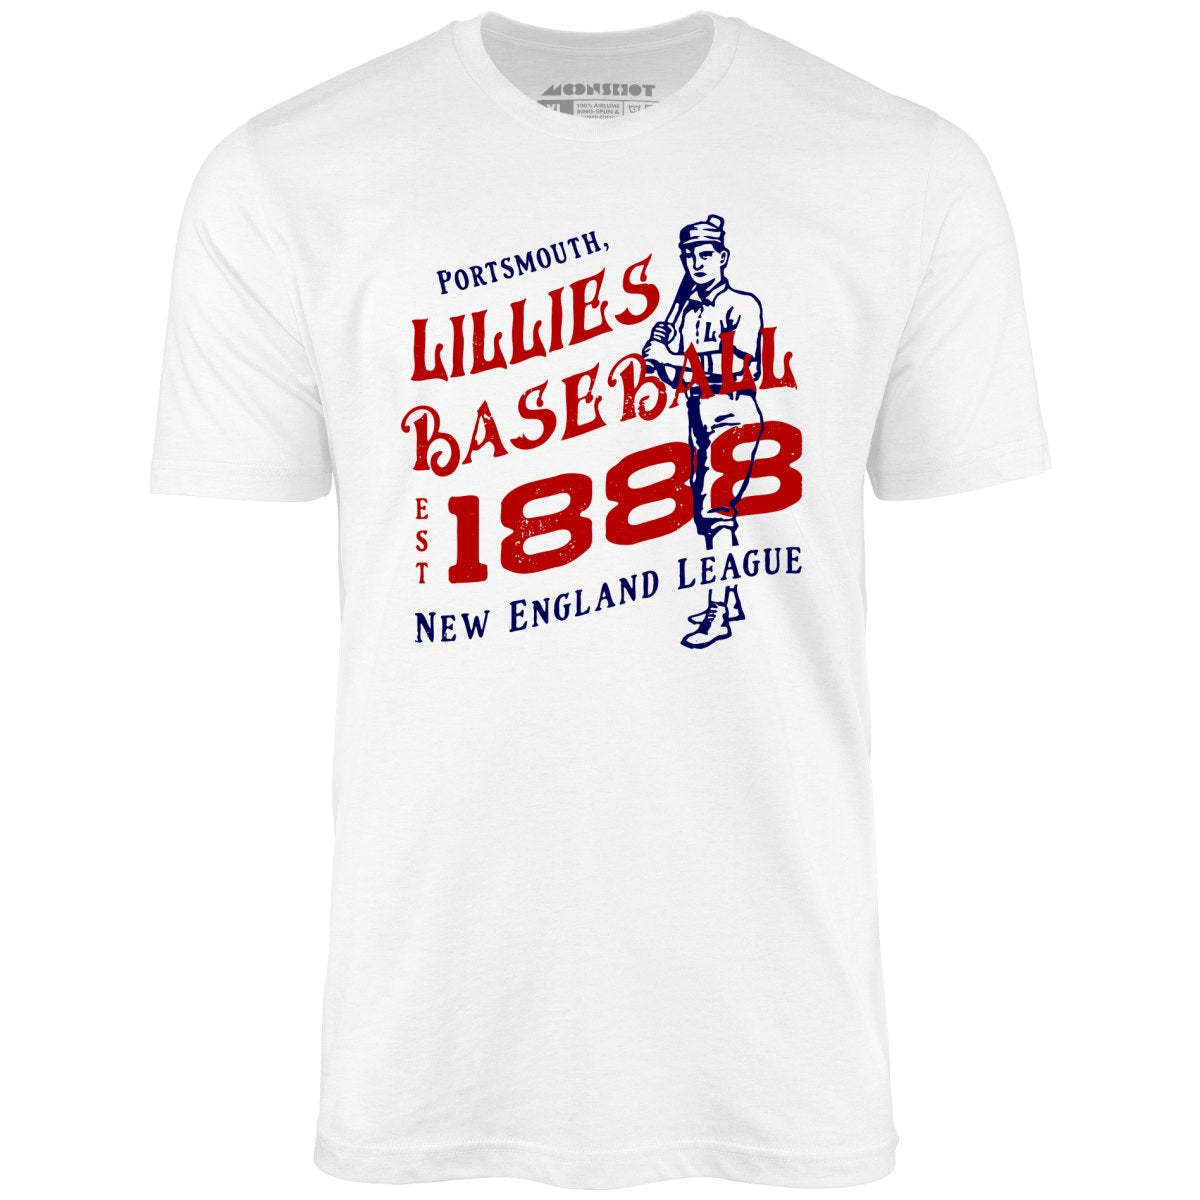 Portsmouth Lillies - New Hampshire - Vintage Defunct Baseball Teams - Unisex T-Shirt